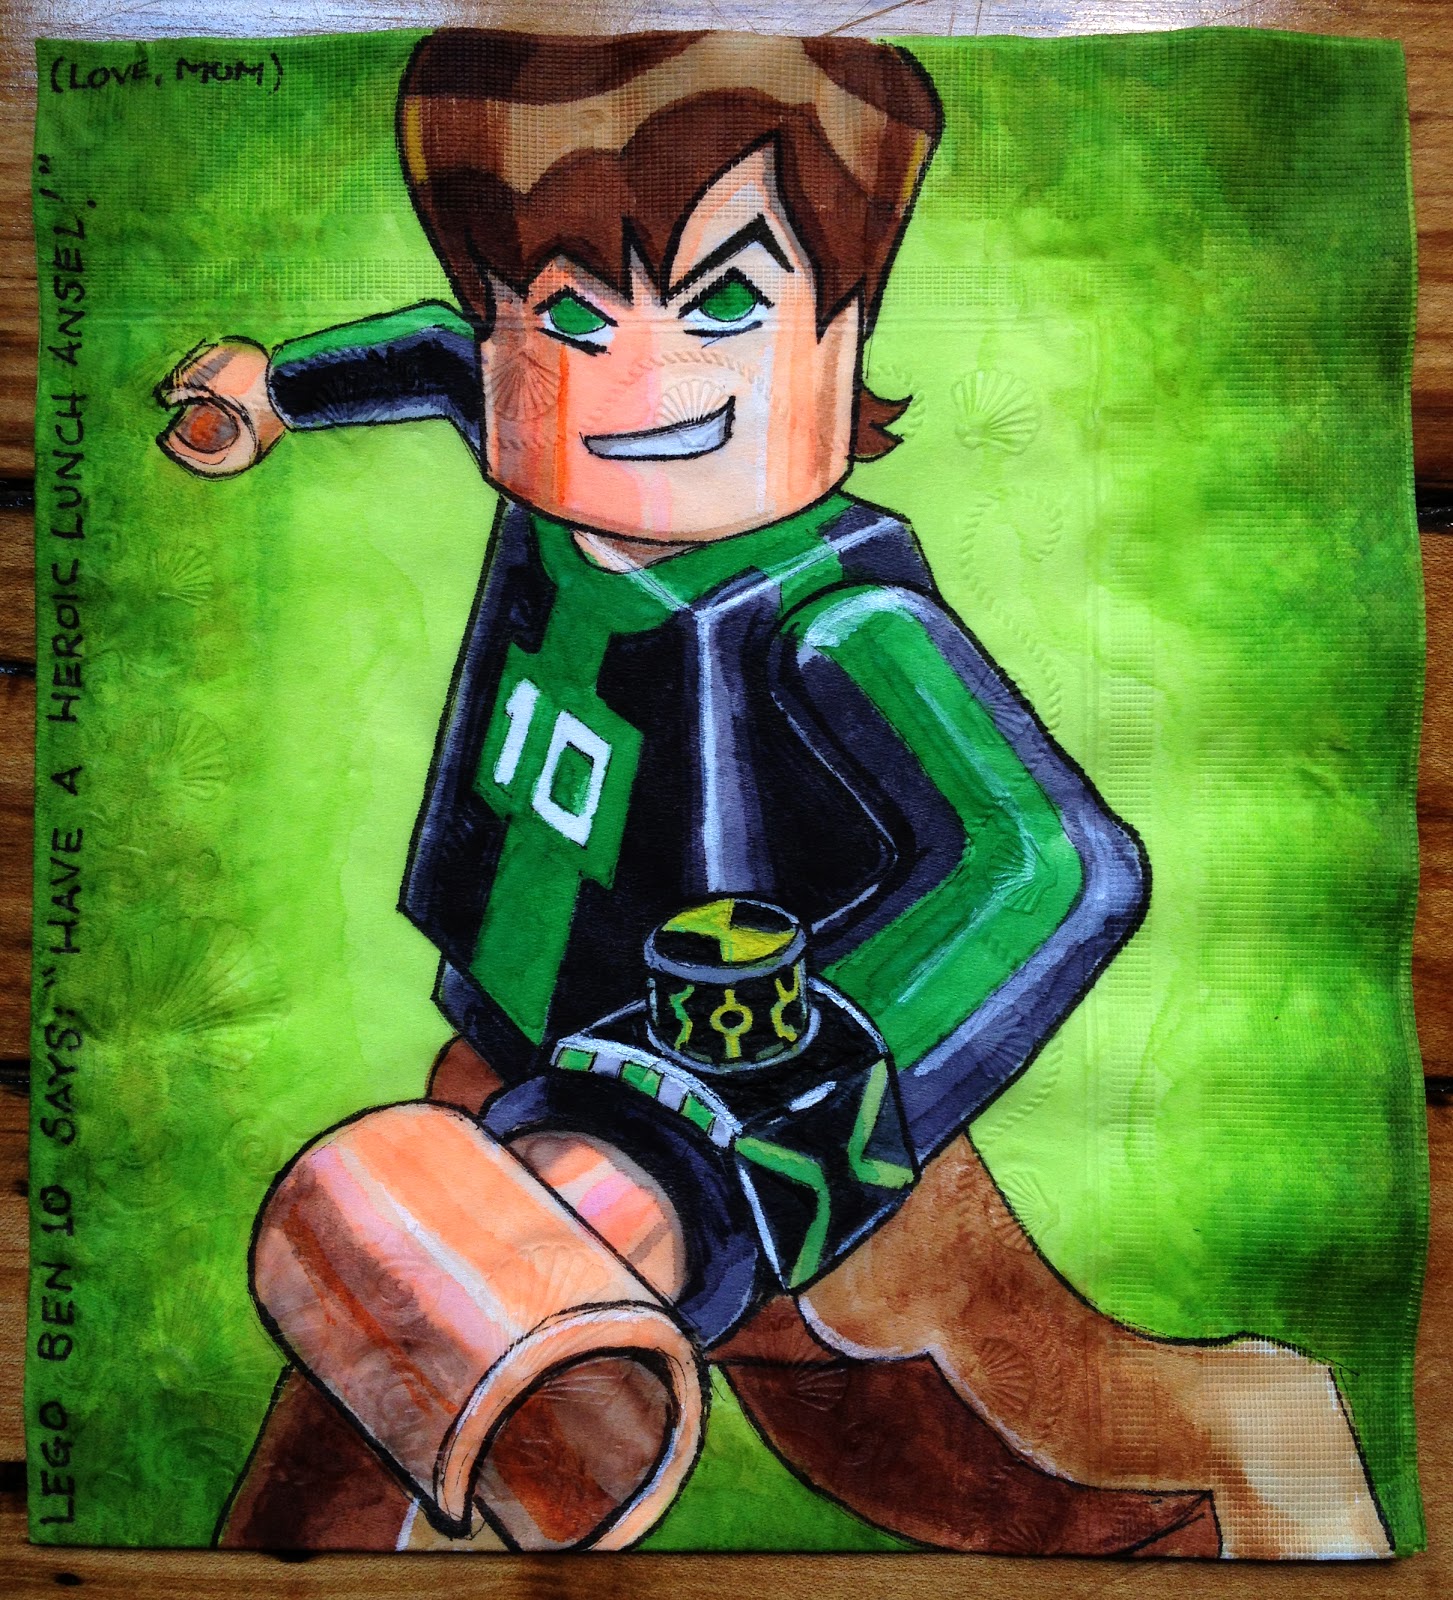 lego ben 10 video game - Lego Ben 10 Says Have A Herois Lunch Ansel Love, Mom